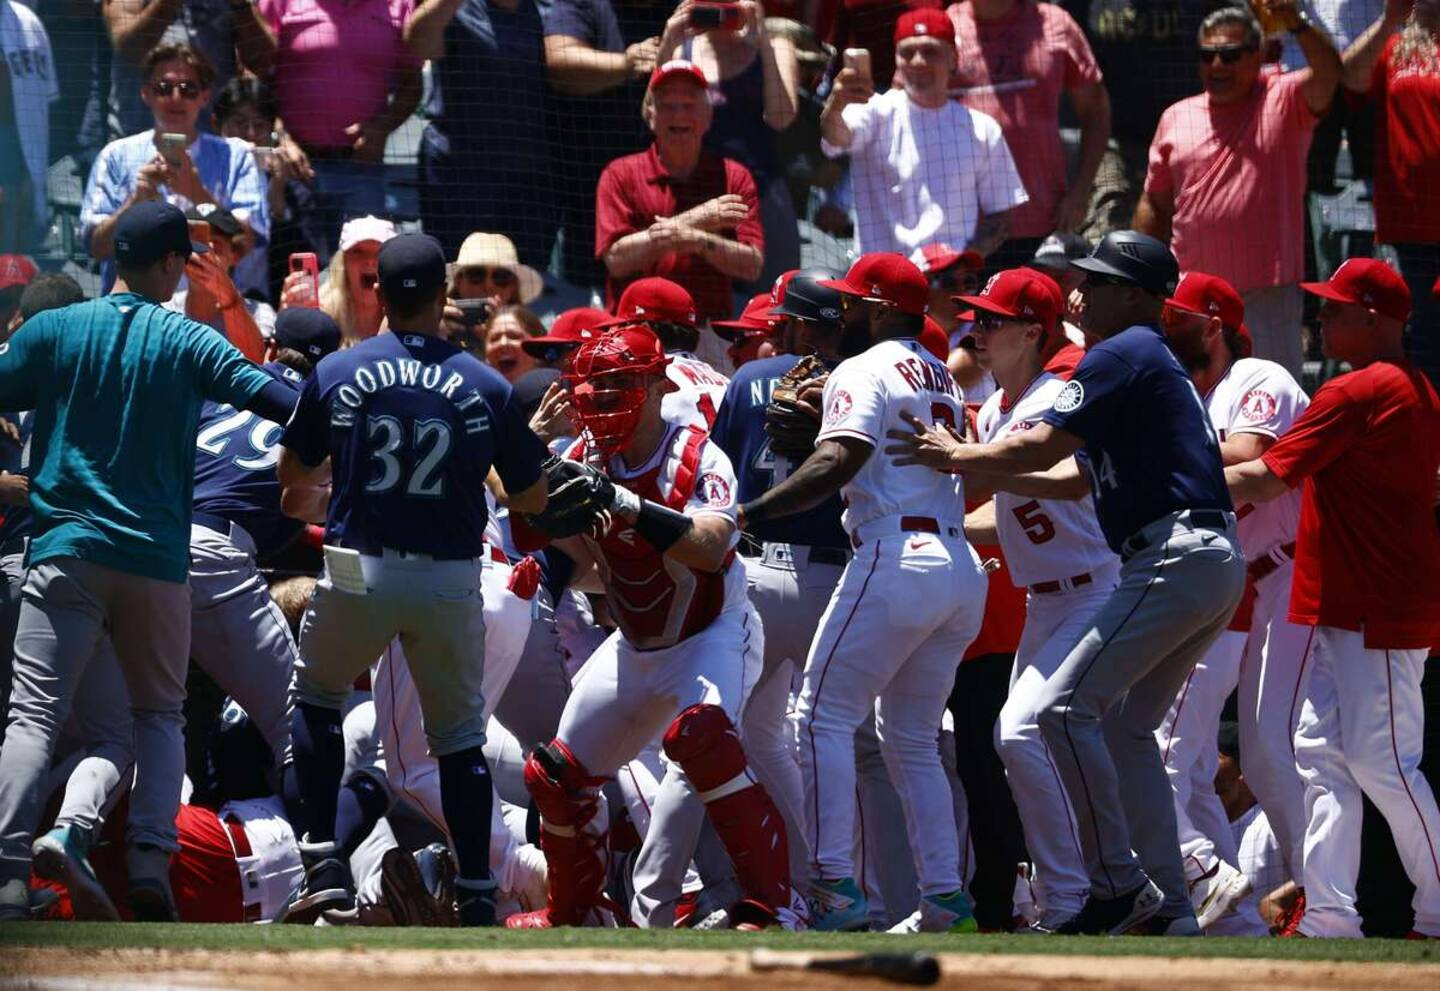 General battle between the Angels and the Mariners: Several suspensions issued by major league baseball